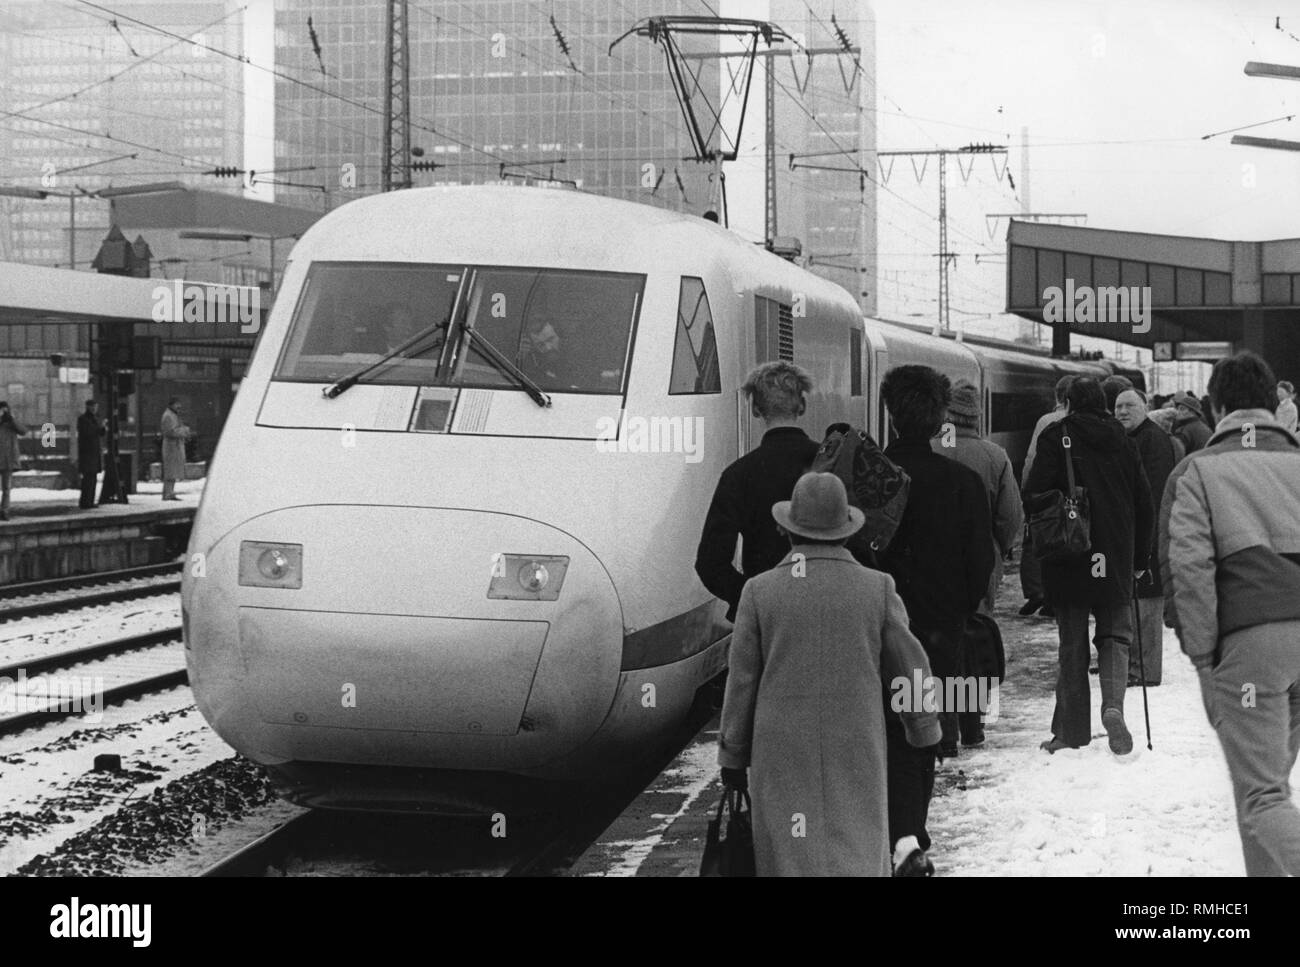 The ICE (Intercity Experimental) at the Essen Central Station during one of the first demonstration rides. Stock Photo